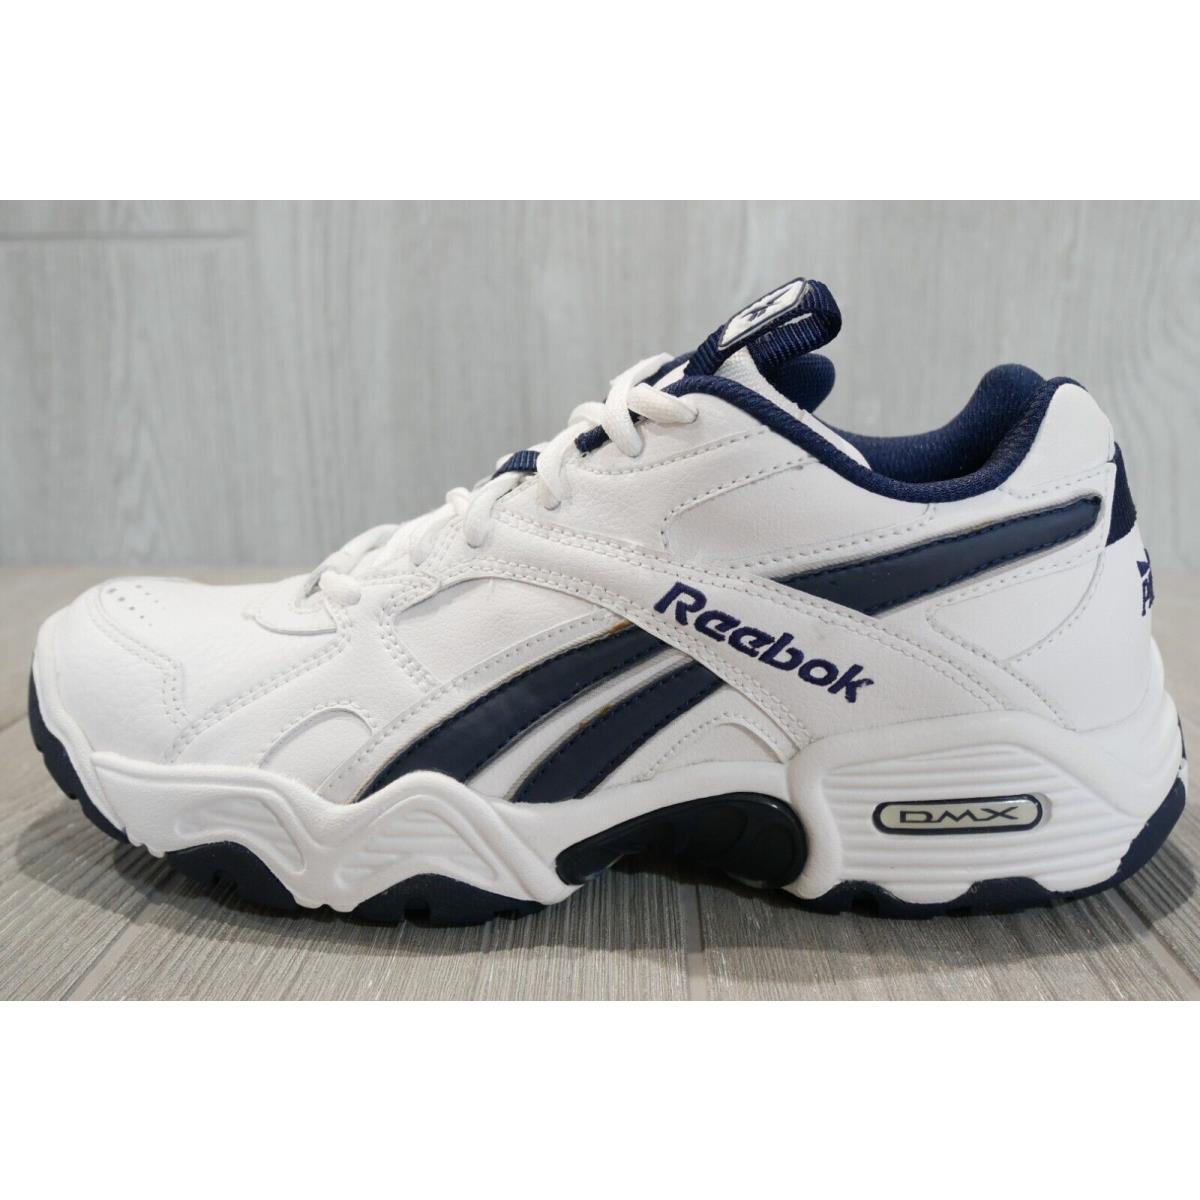 Vintage Reebok Paydirt Low Dmx Training Shoes 2003 Mens 9 12 Oss